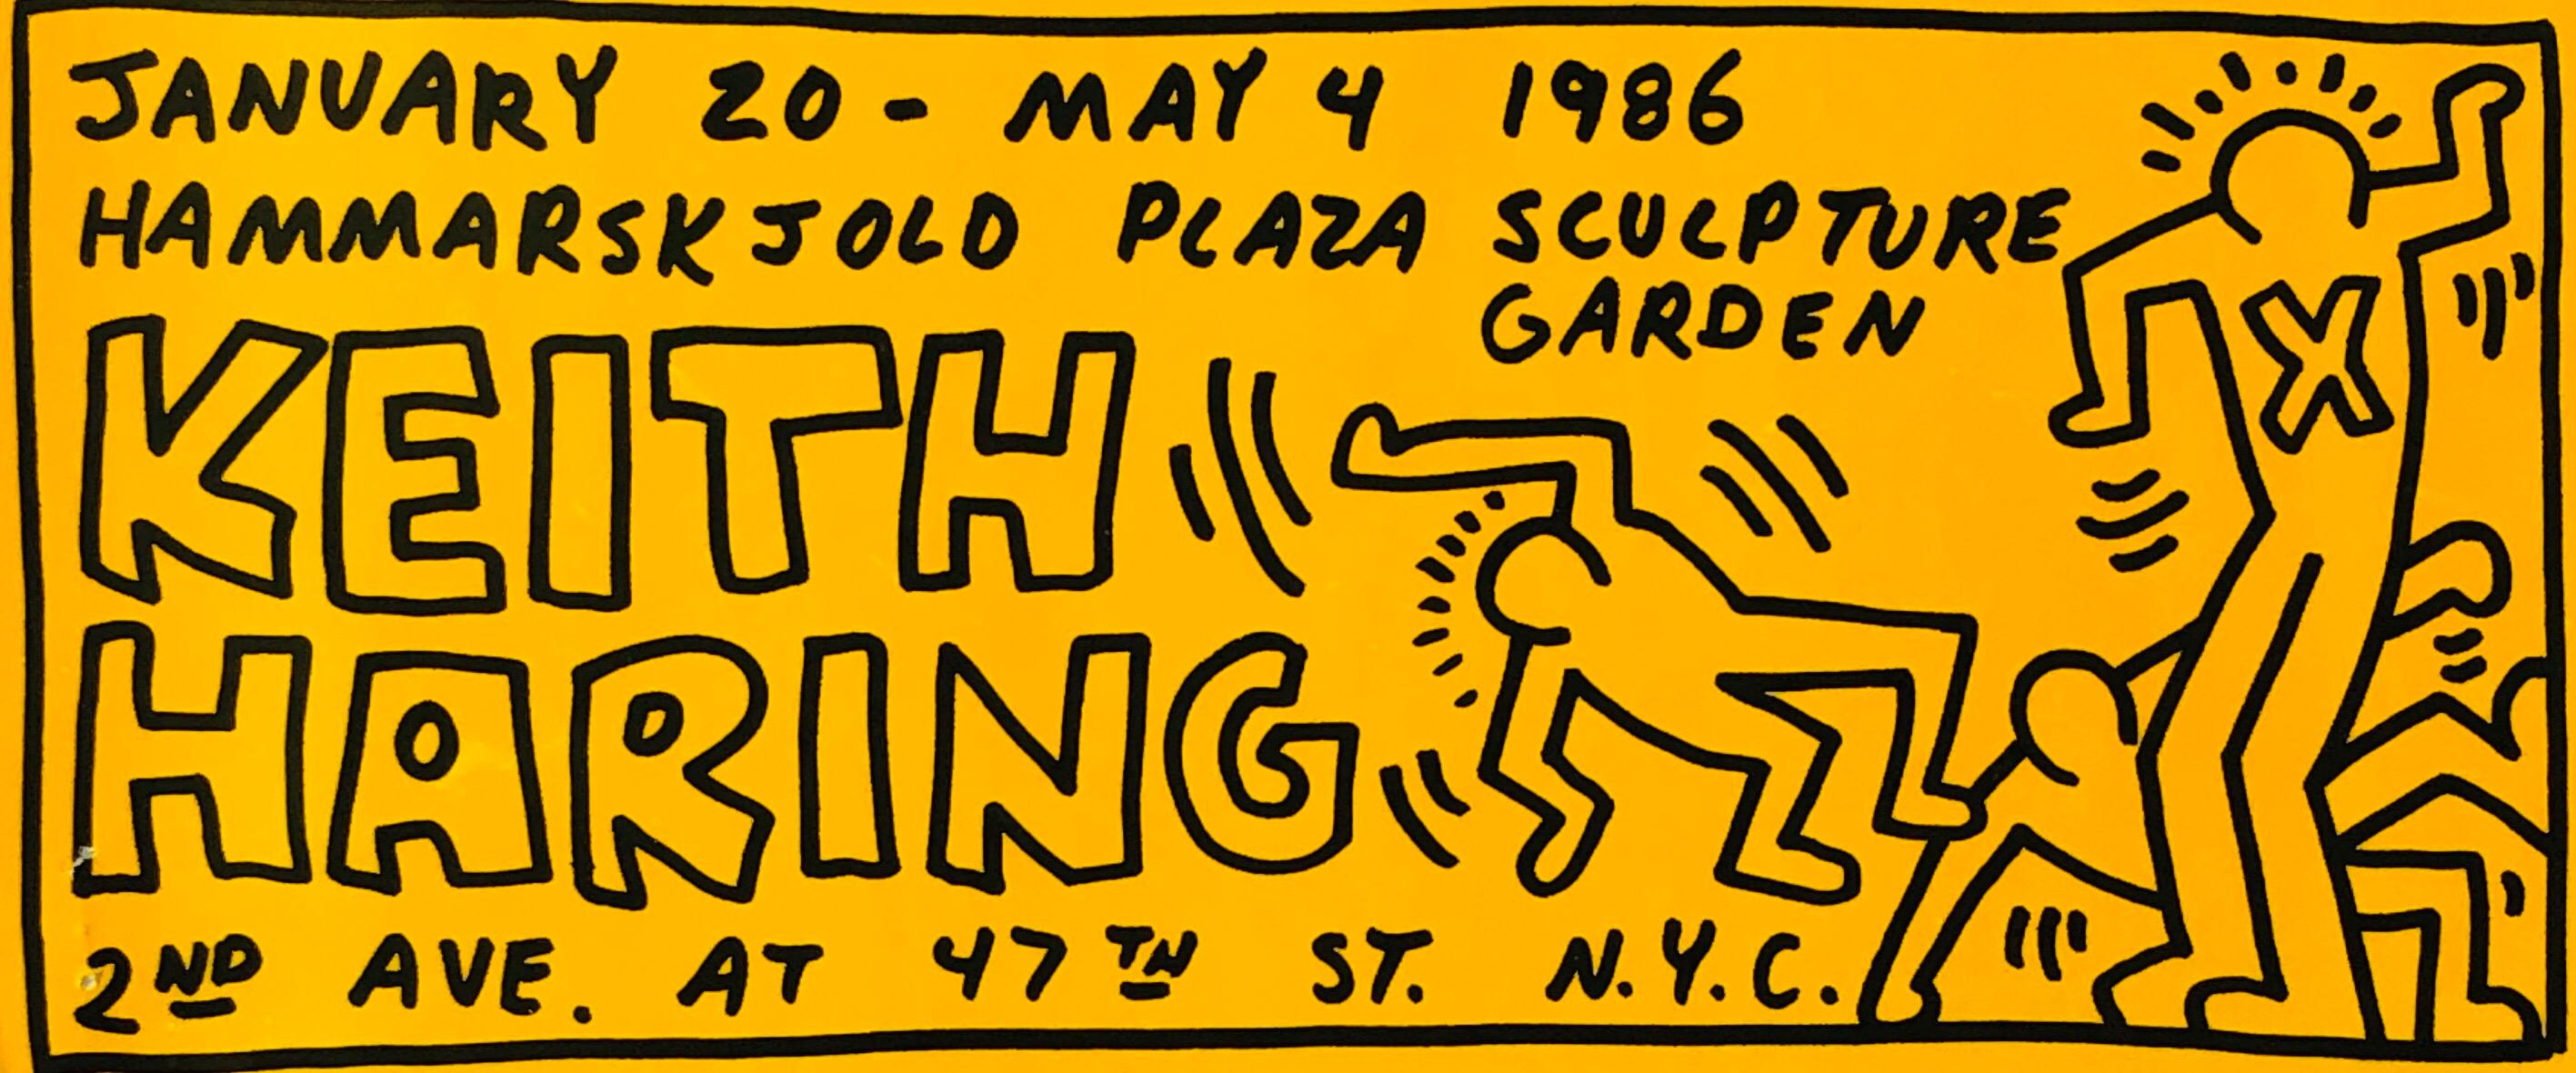 Keith Haring National Endowment for the Arts, New York 1986:
Vintage original Haring designed announcement advertising an exhibition of two of Keith Haring’s sculptures, one untitled and the other called
“Blue Curling Dog” on display at Dag